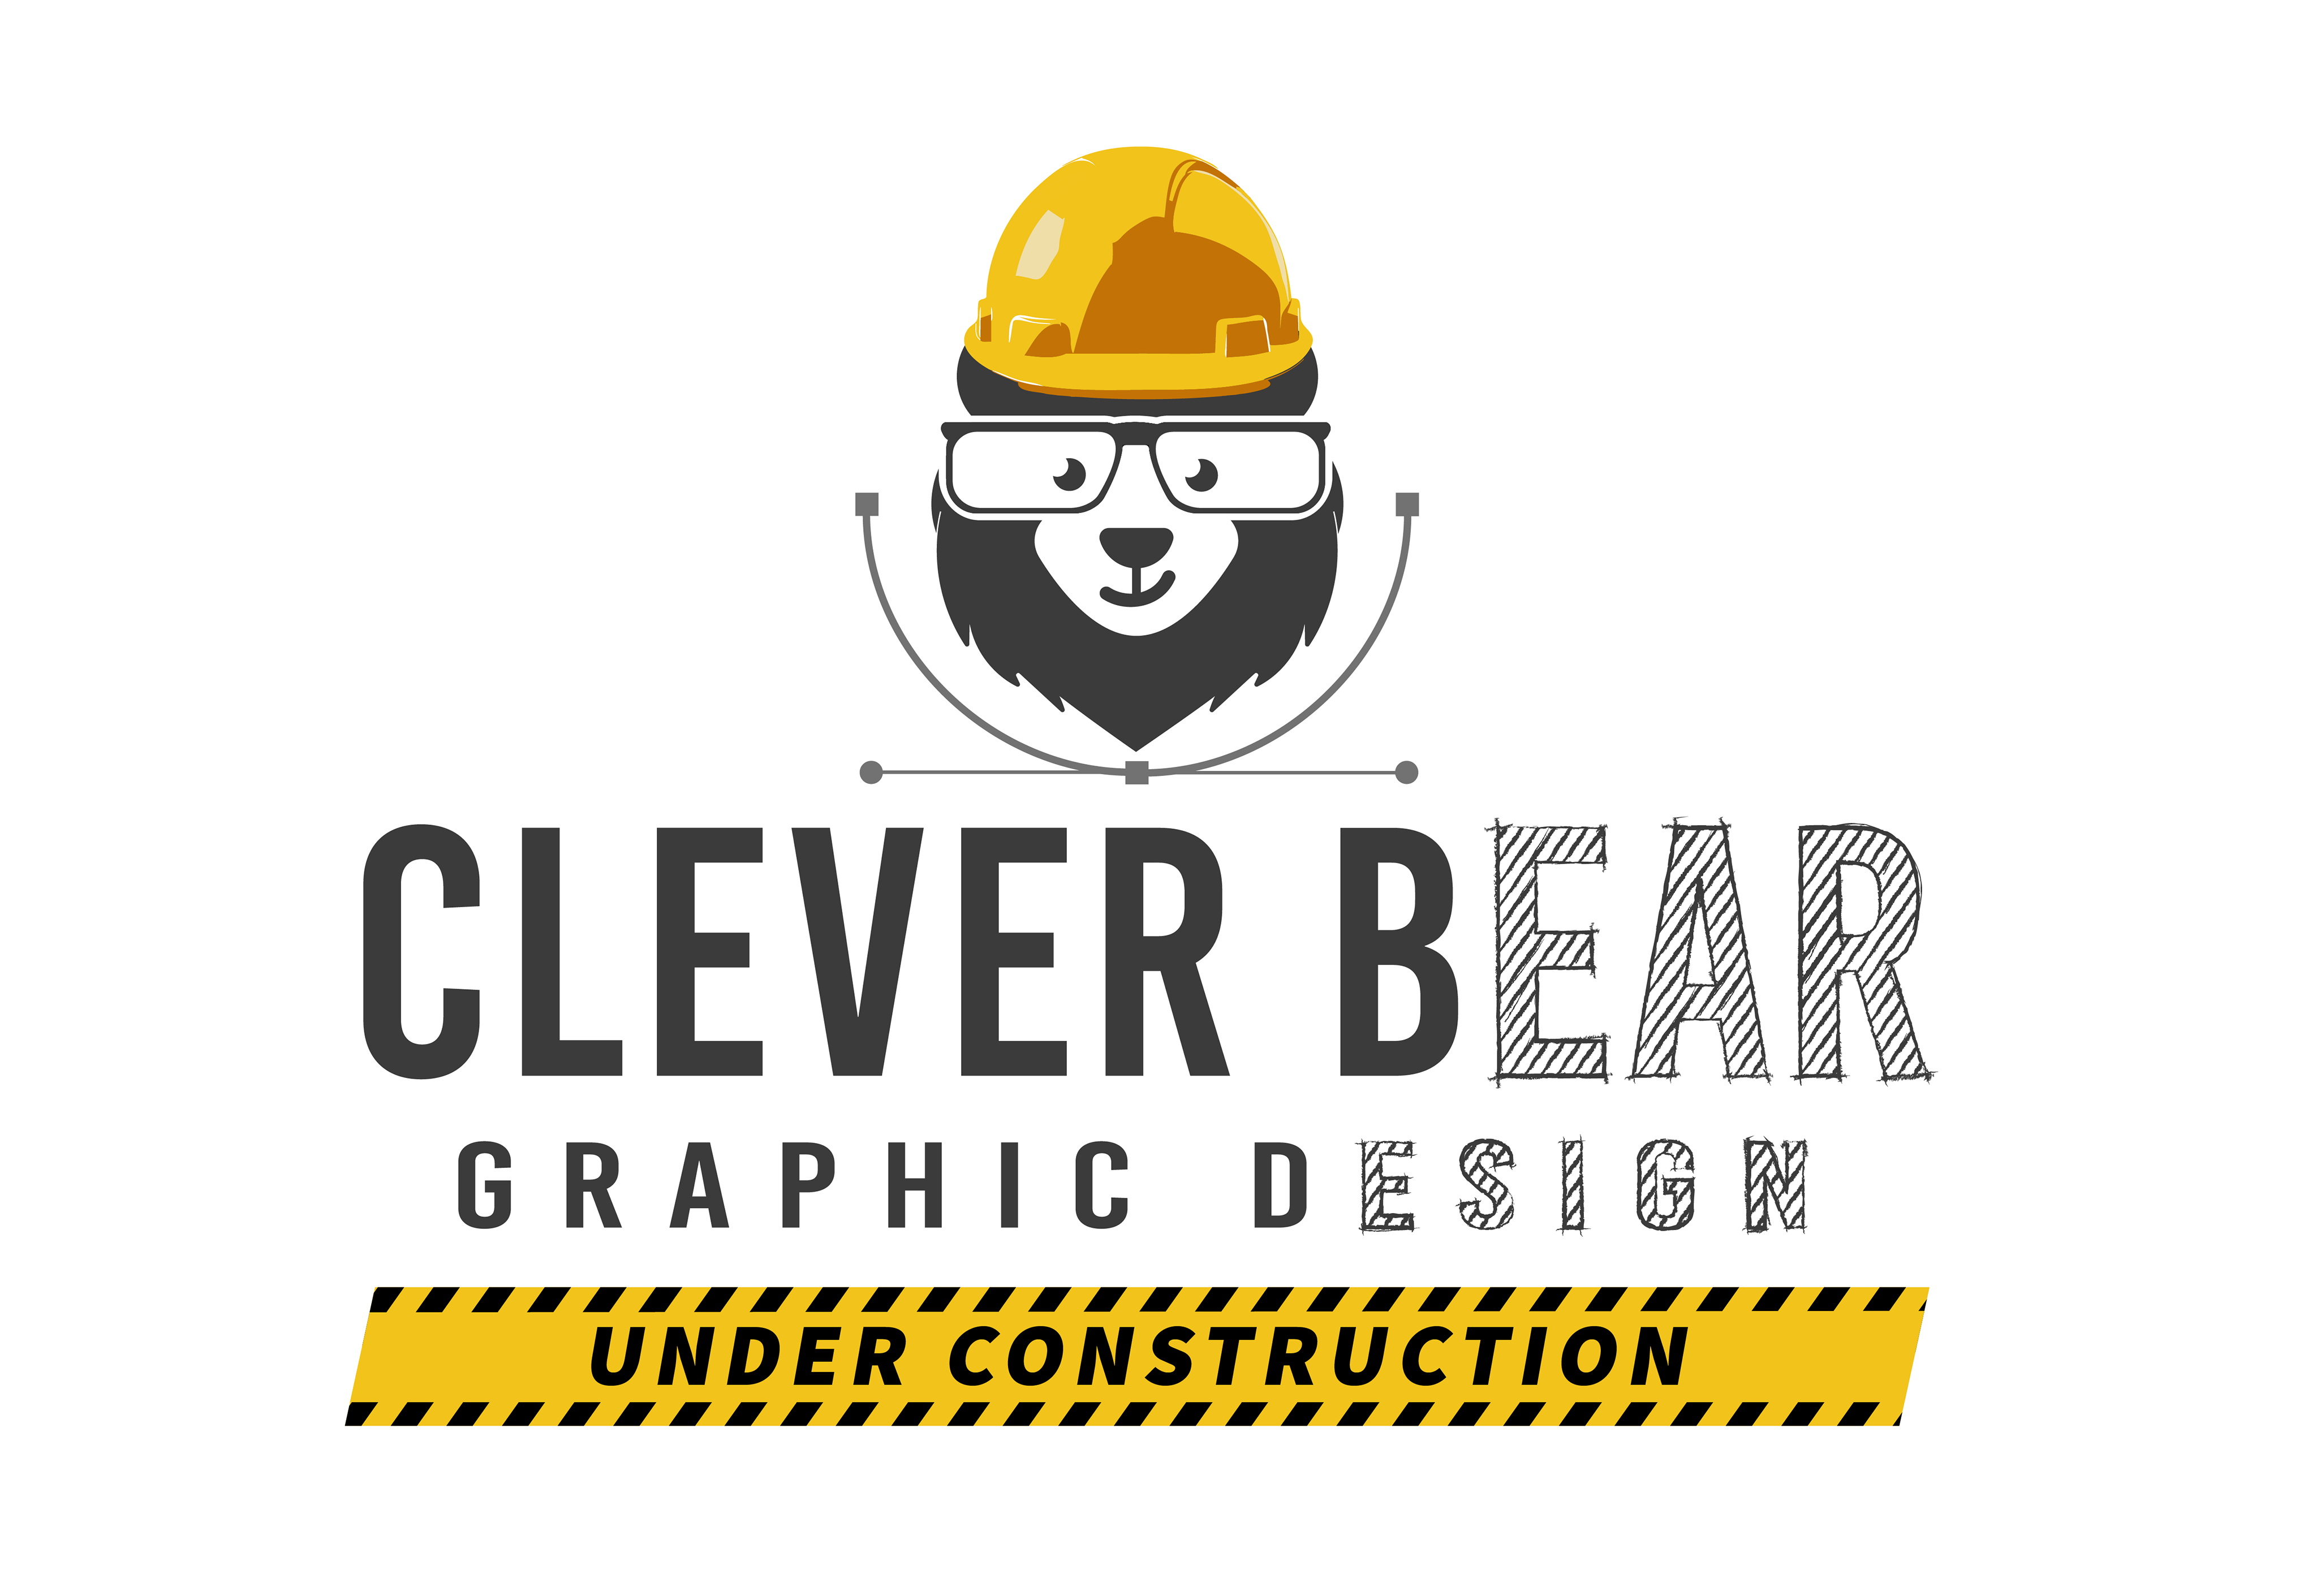 Clever Bear Graphic Design Under Construction